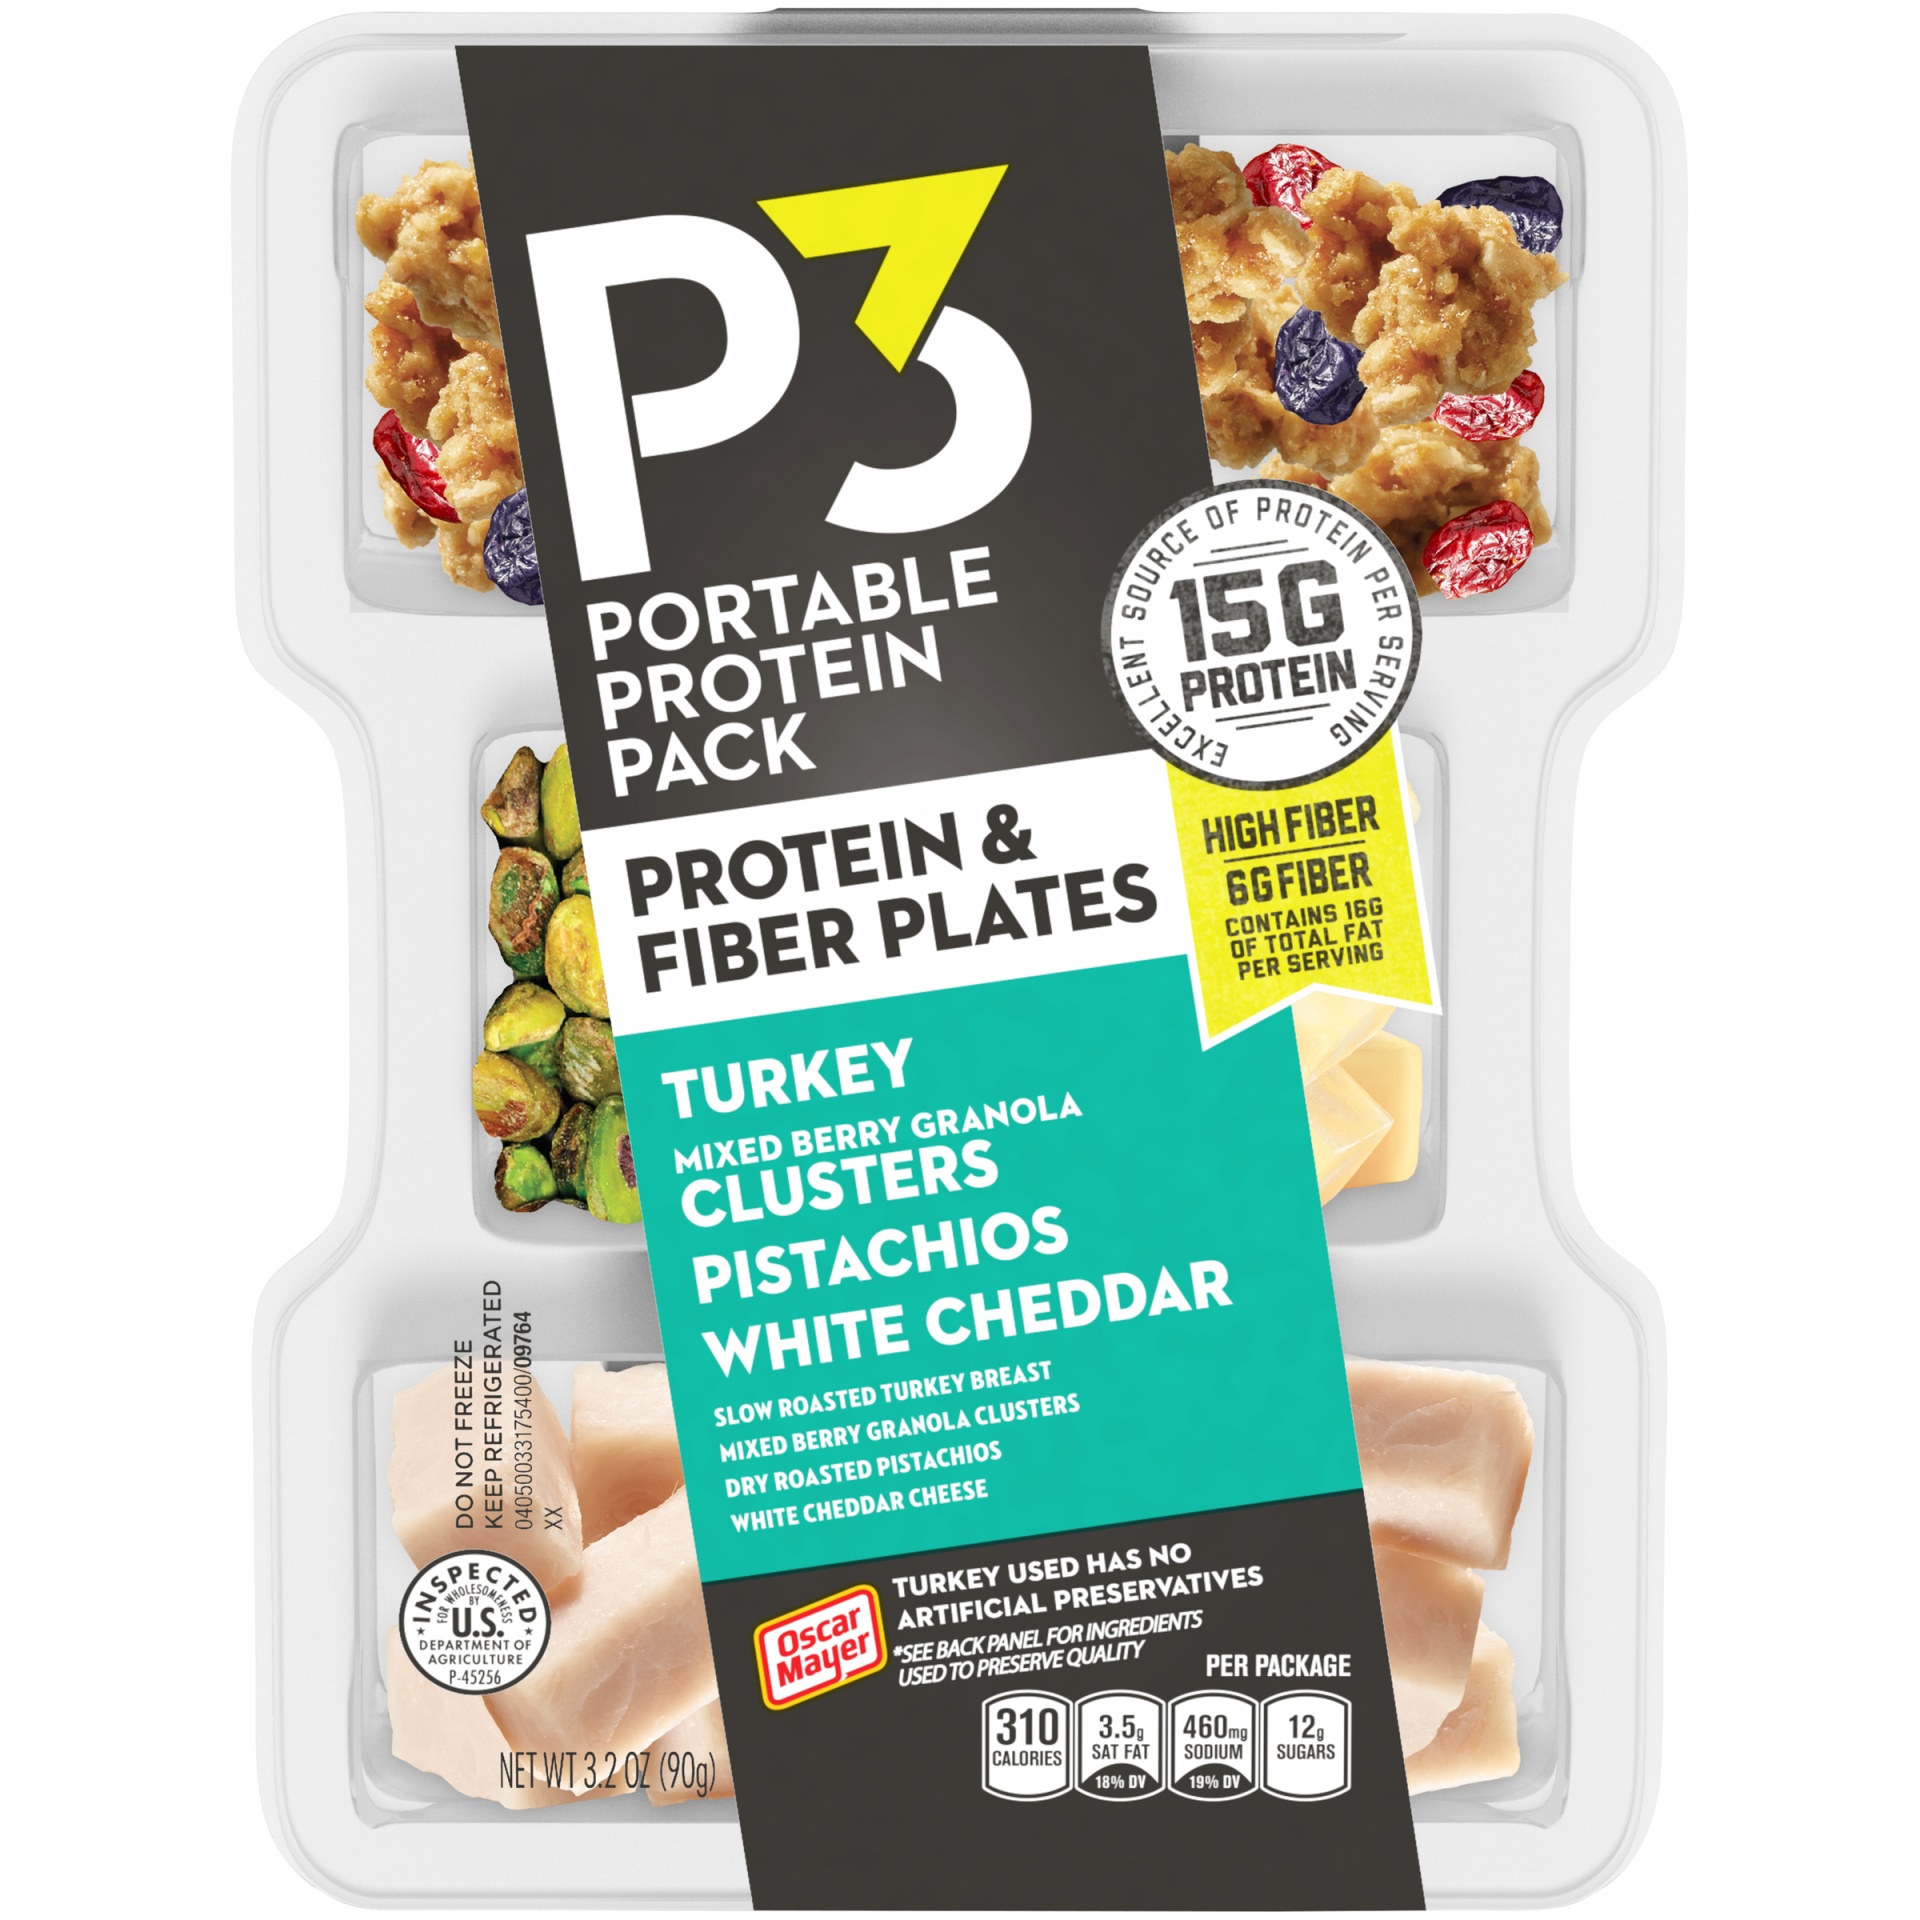 slide 1 of 6, P3 Portable Protein Snack Pack & Fiber Plate with Turkey, Mixed Berry Granola Clusters, Pistachios & White Cheddar Cheese Tray, 3.2 oz